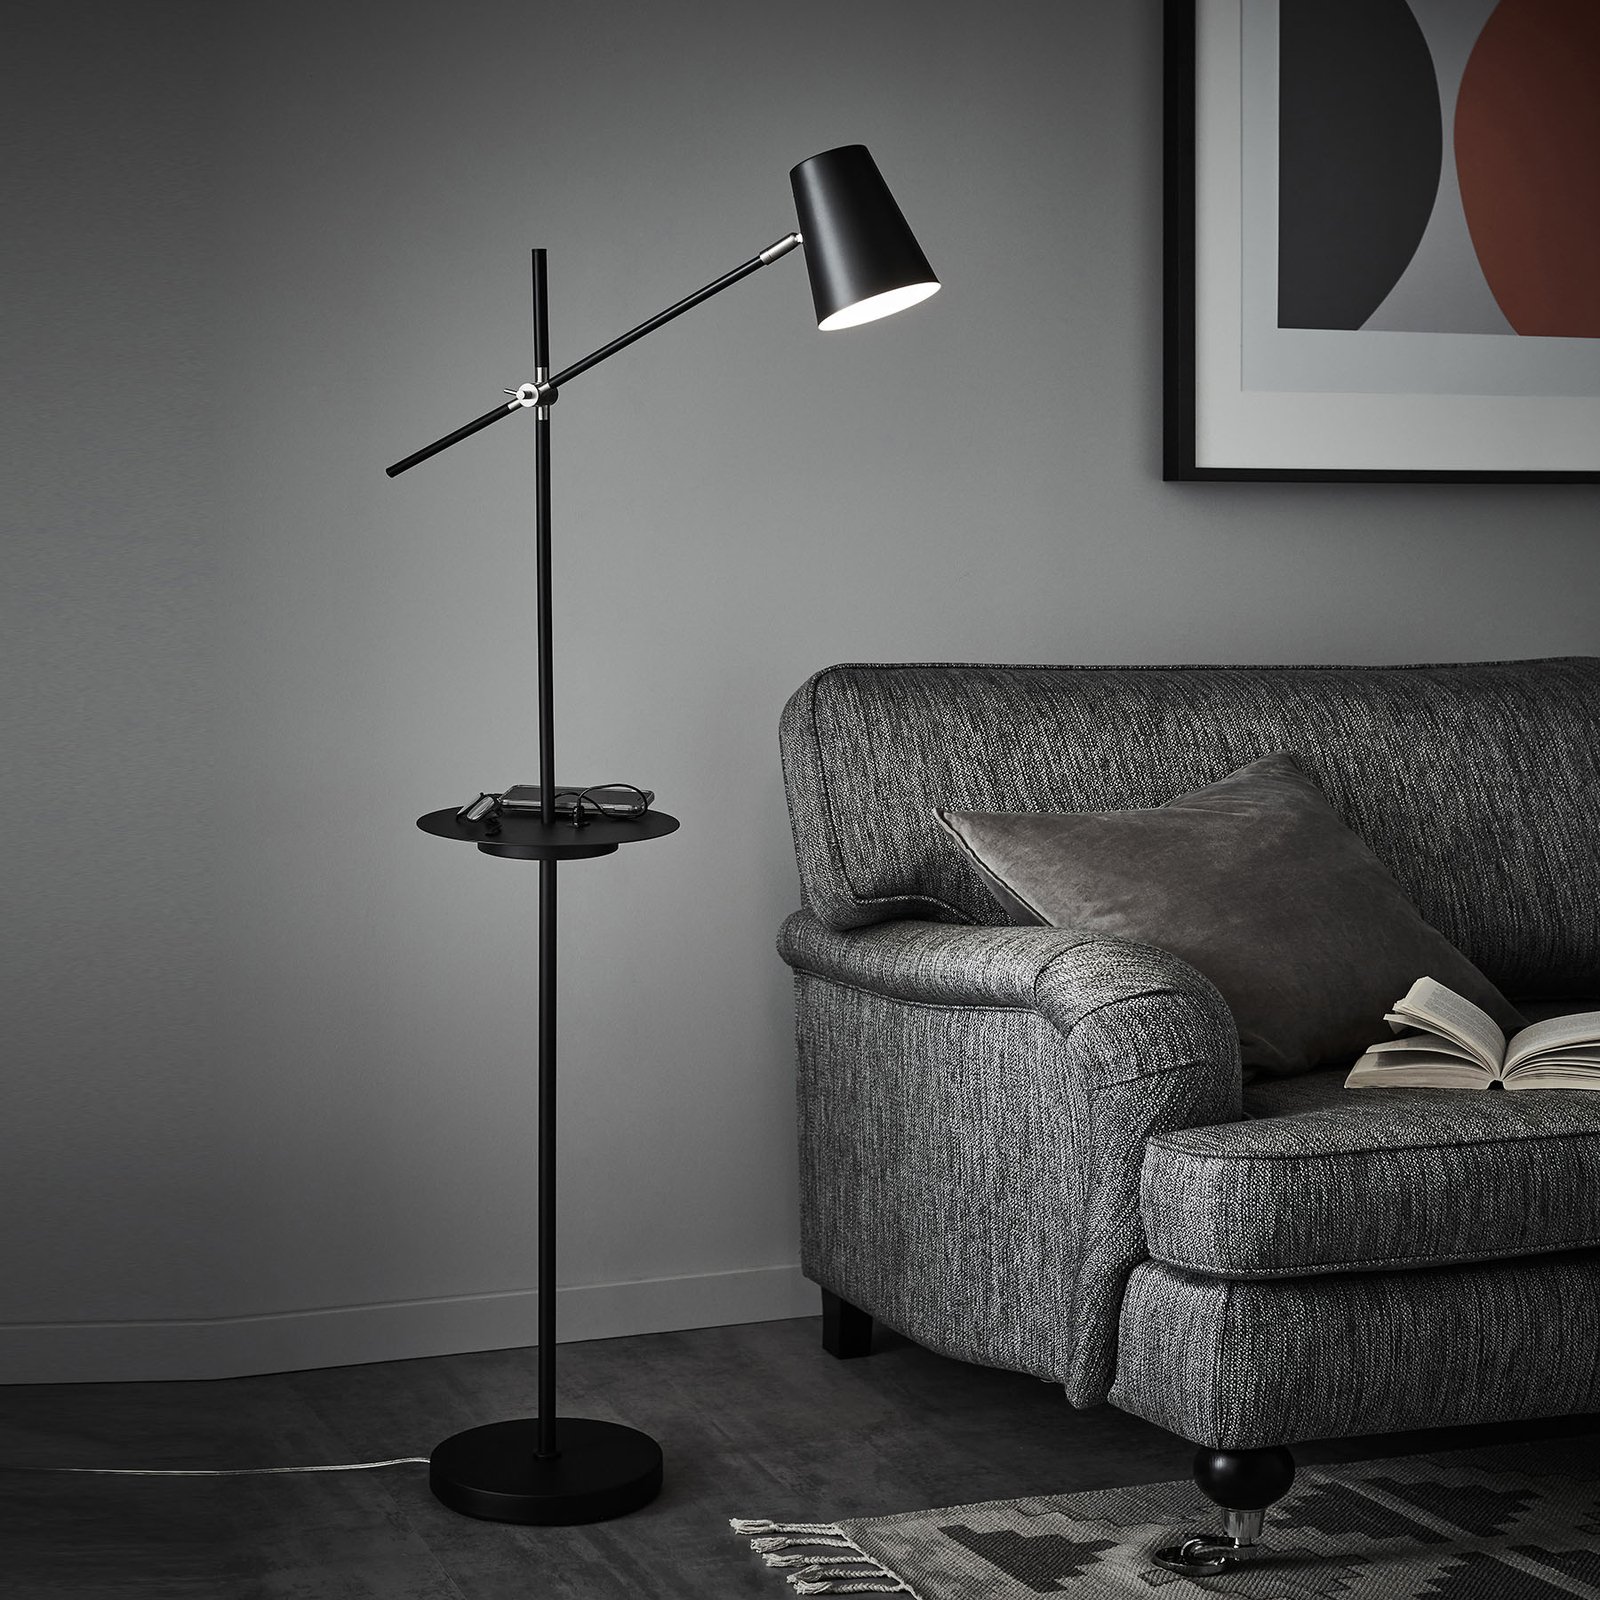 Linear floor lamp with USB charging station, black